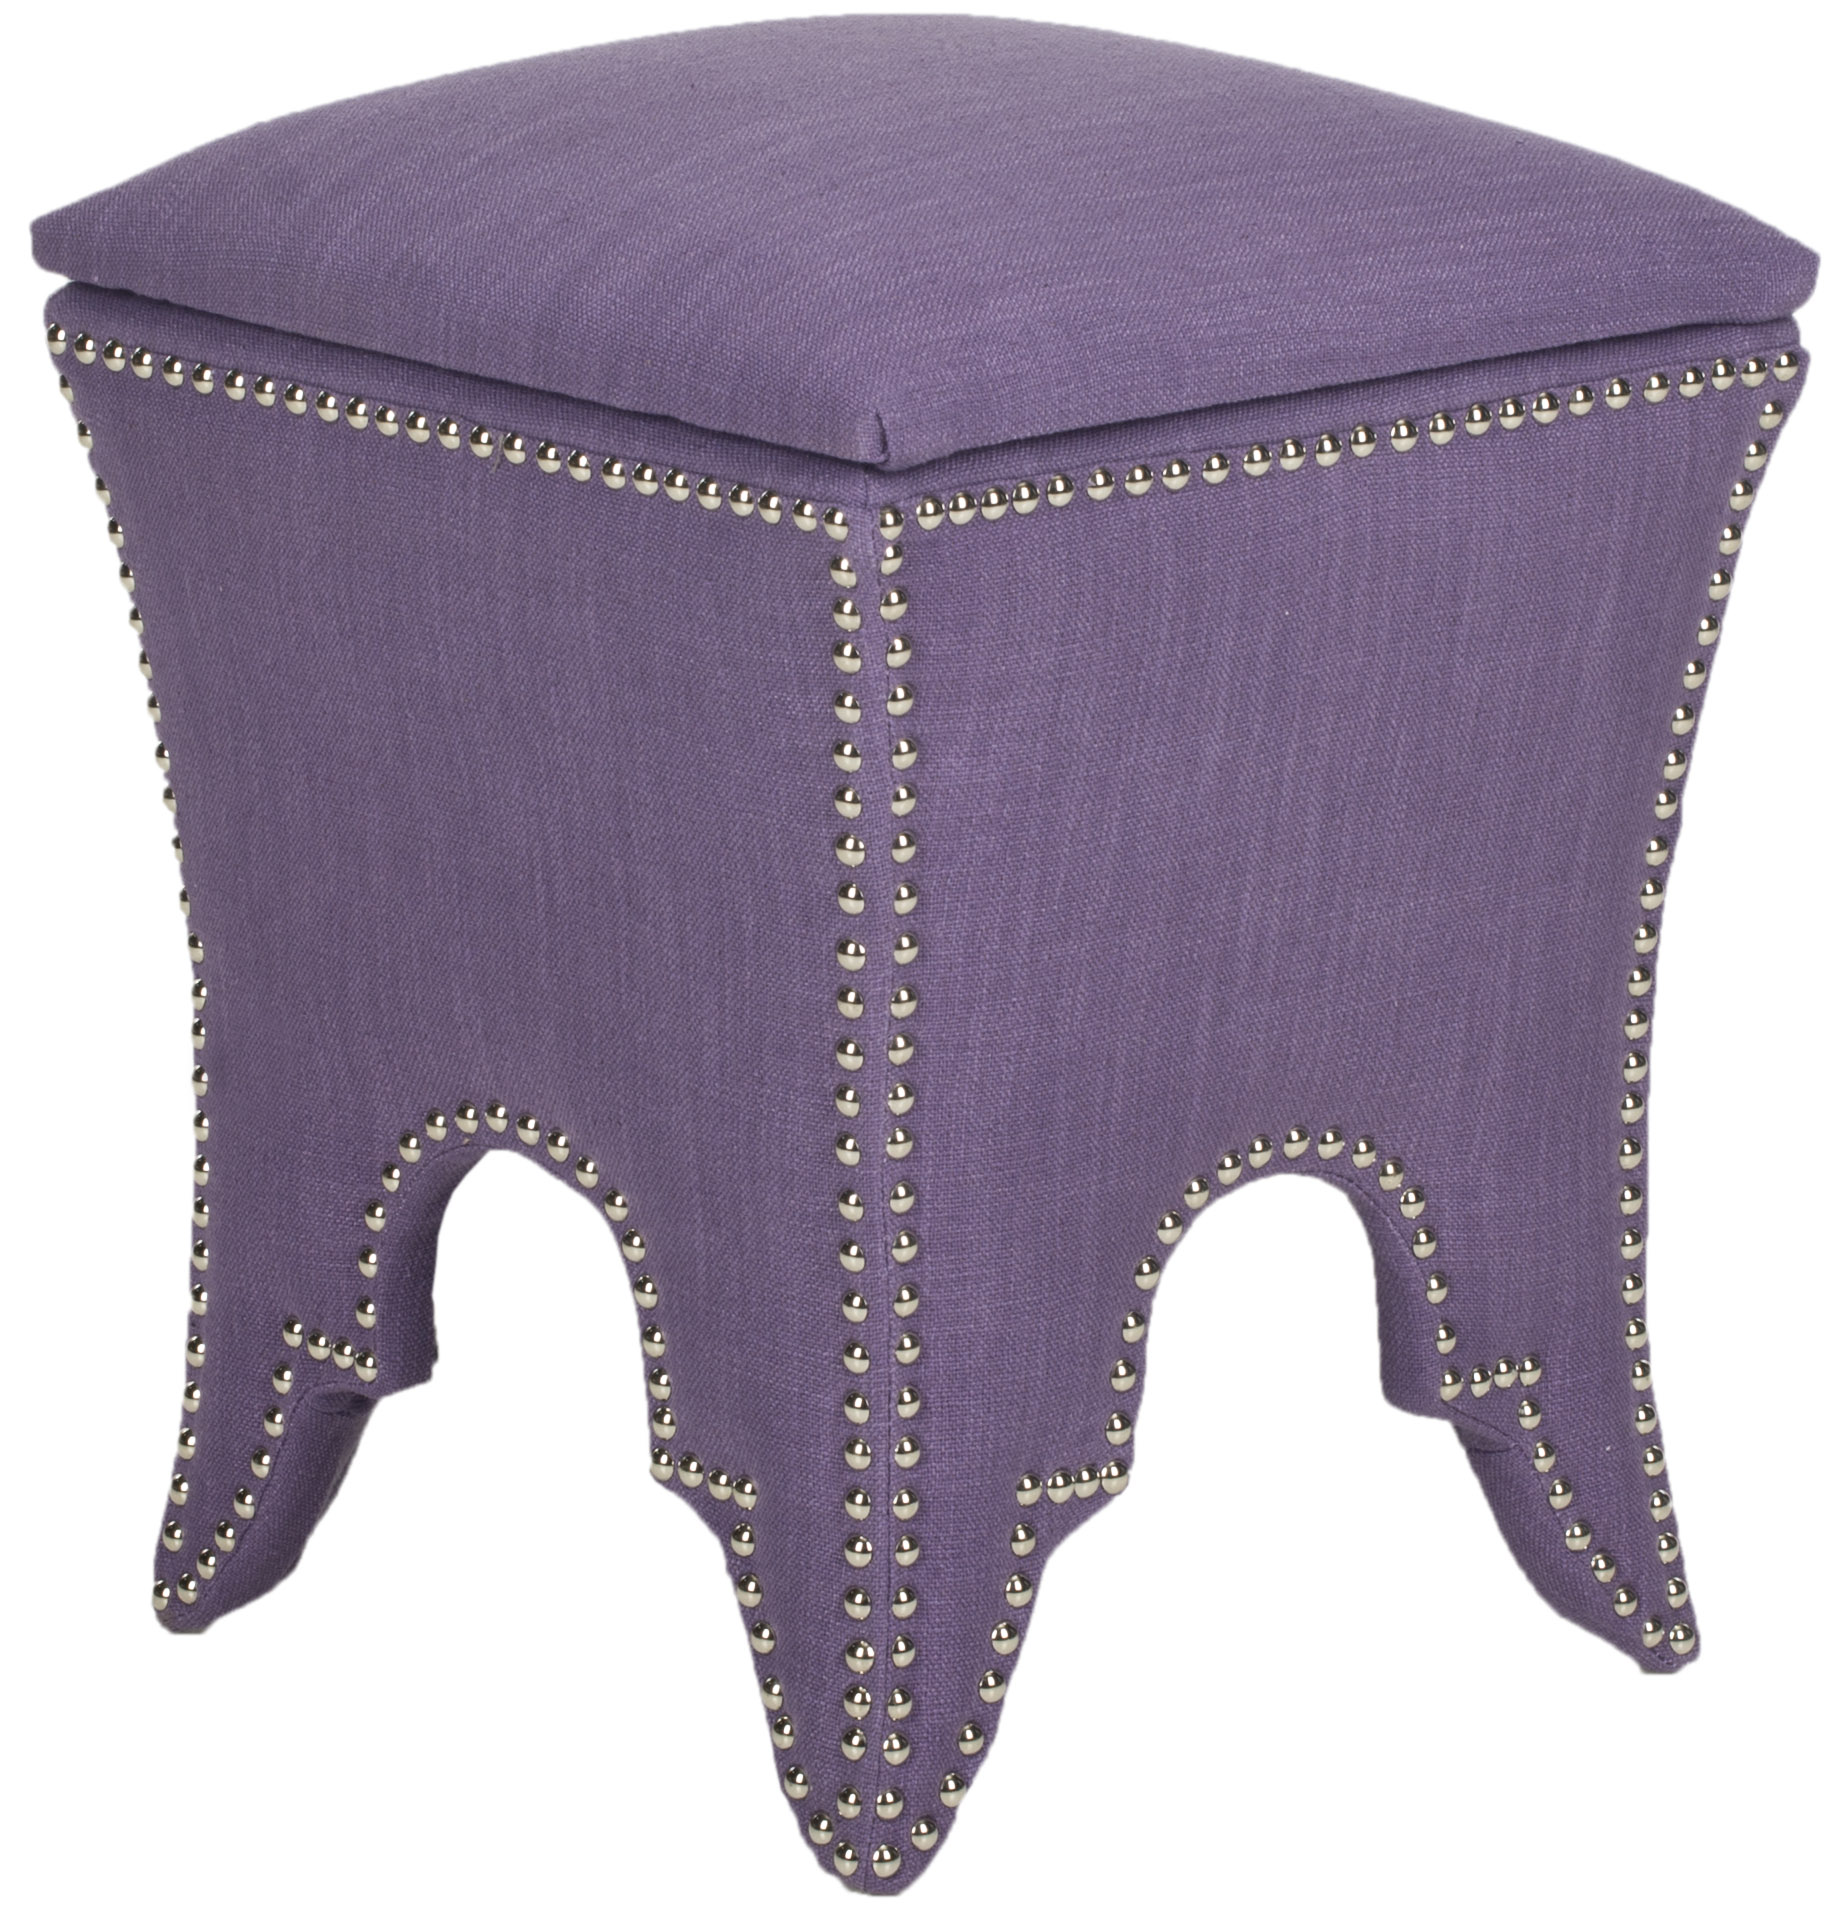 Deidra ottoman in lavender with arched sides from Safavieh